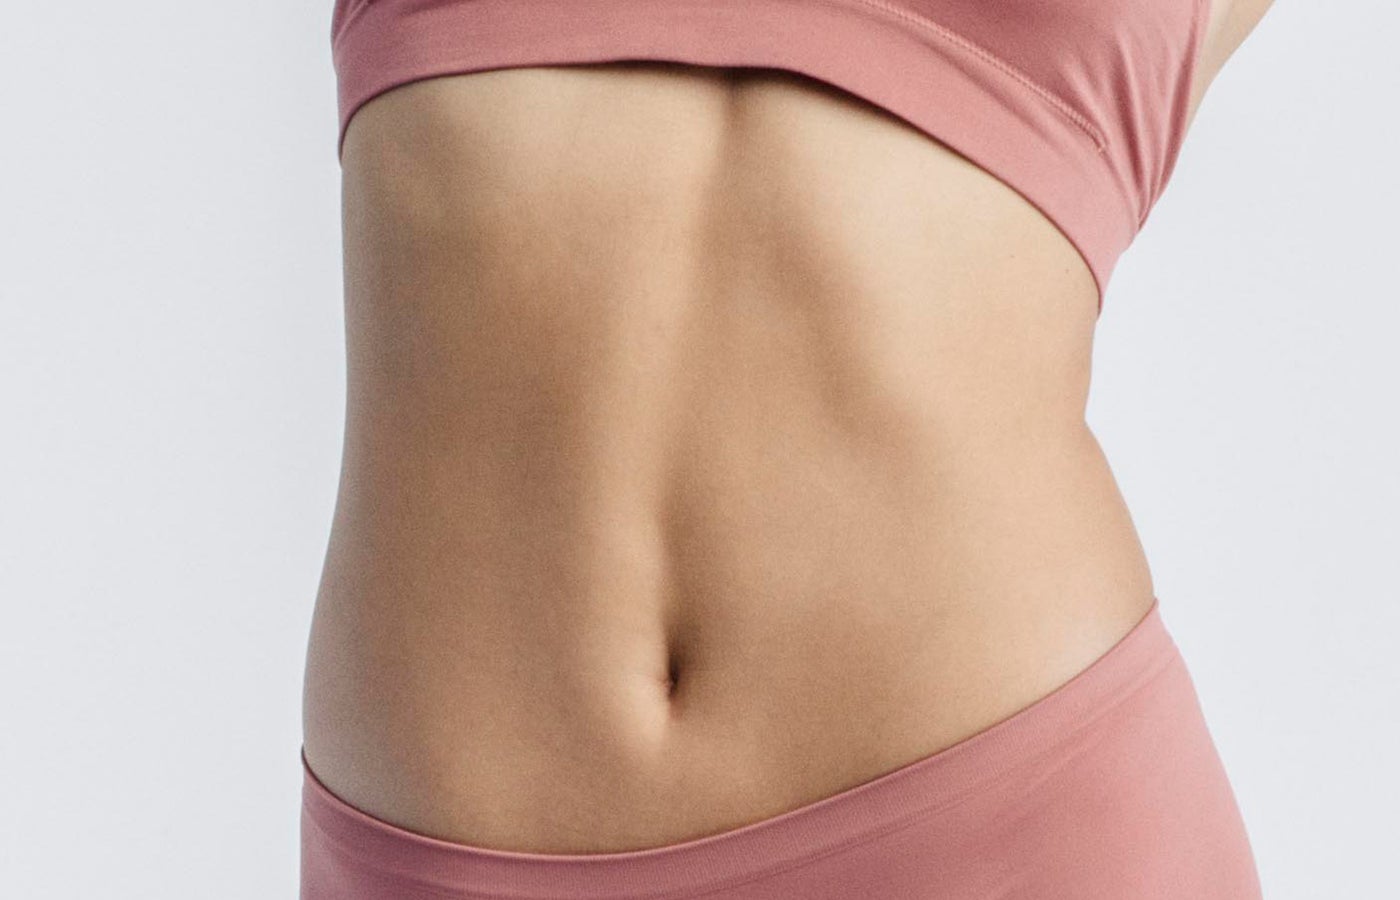 How will patients who undergo the body contouring process be able to do?